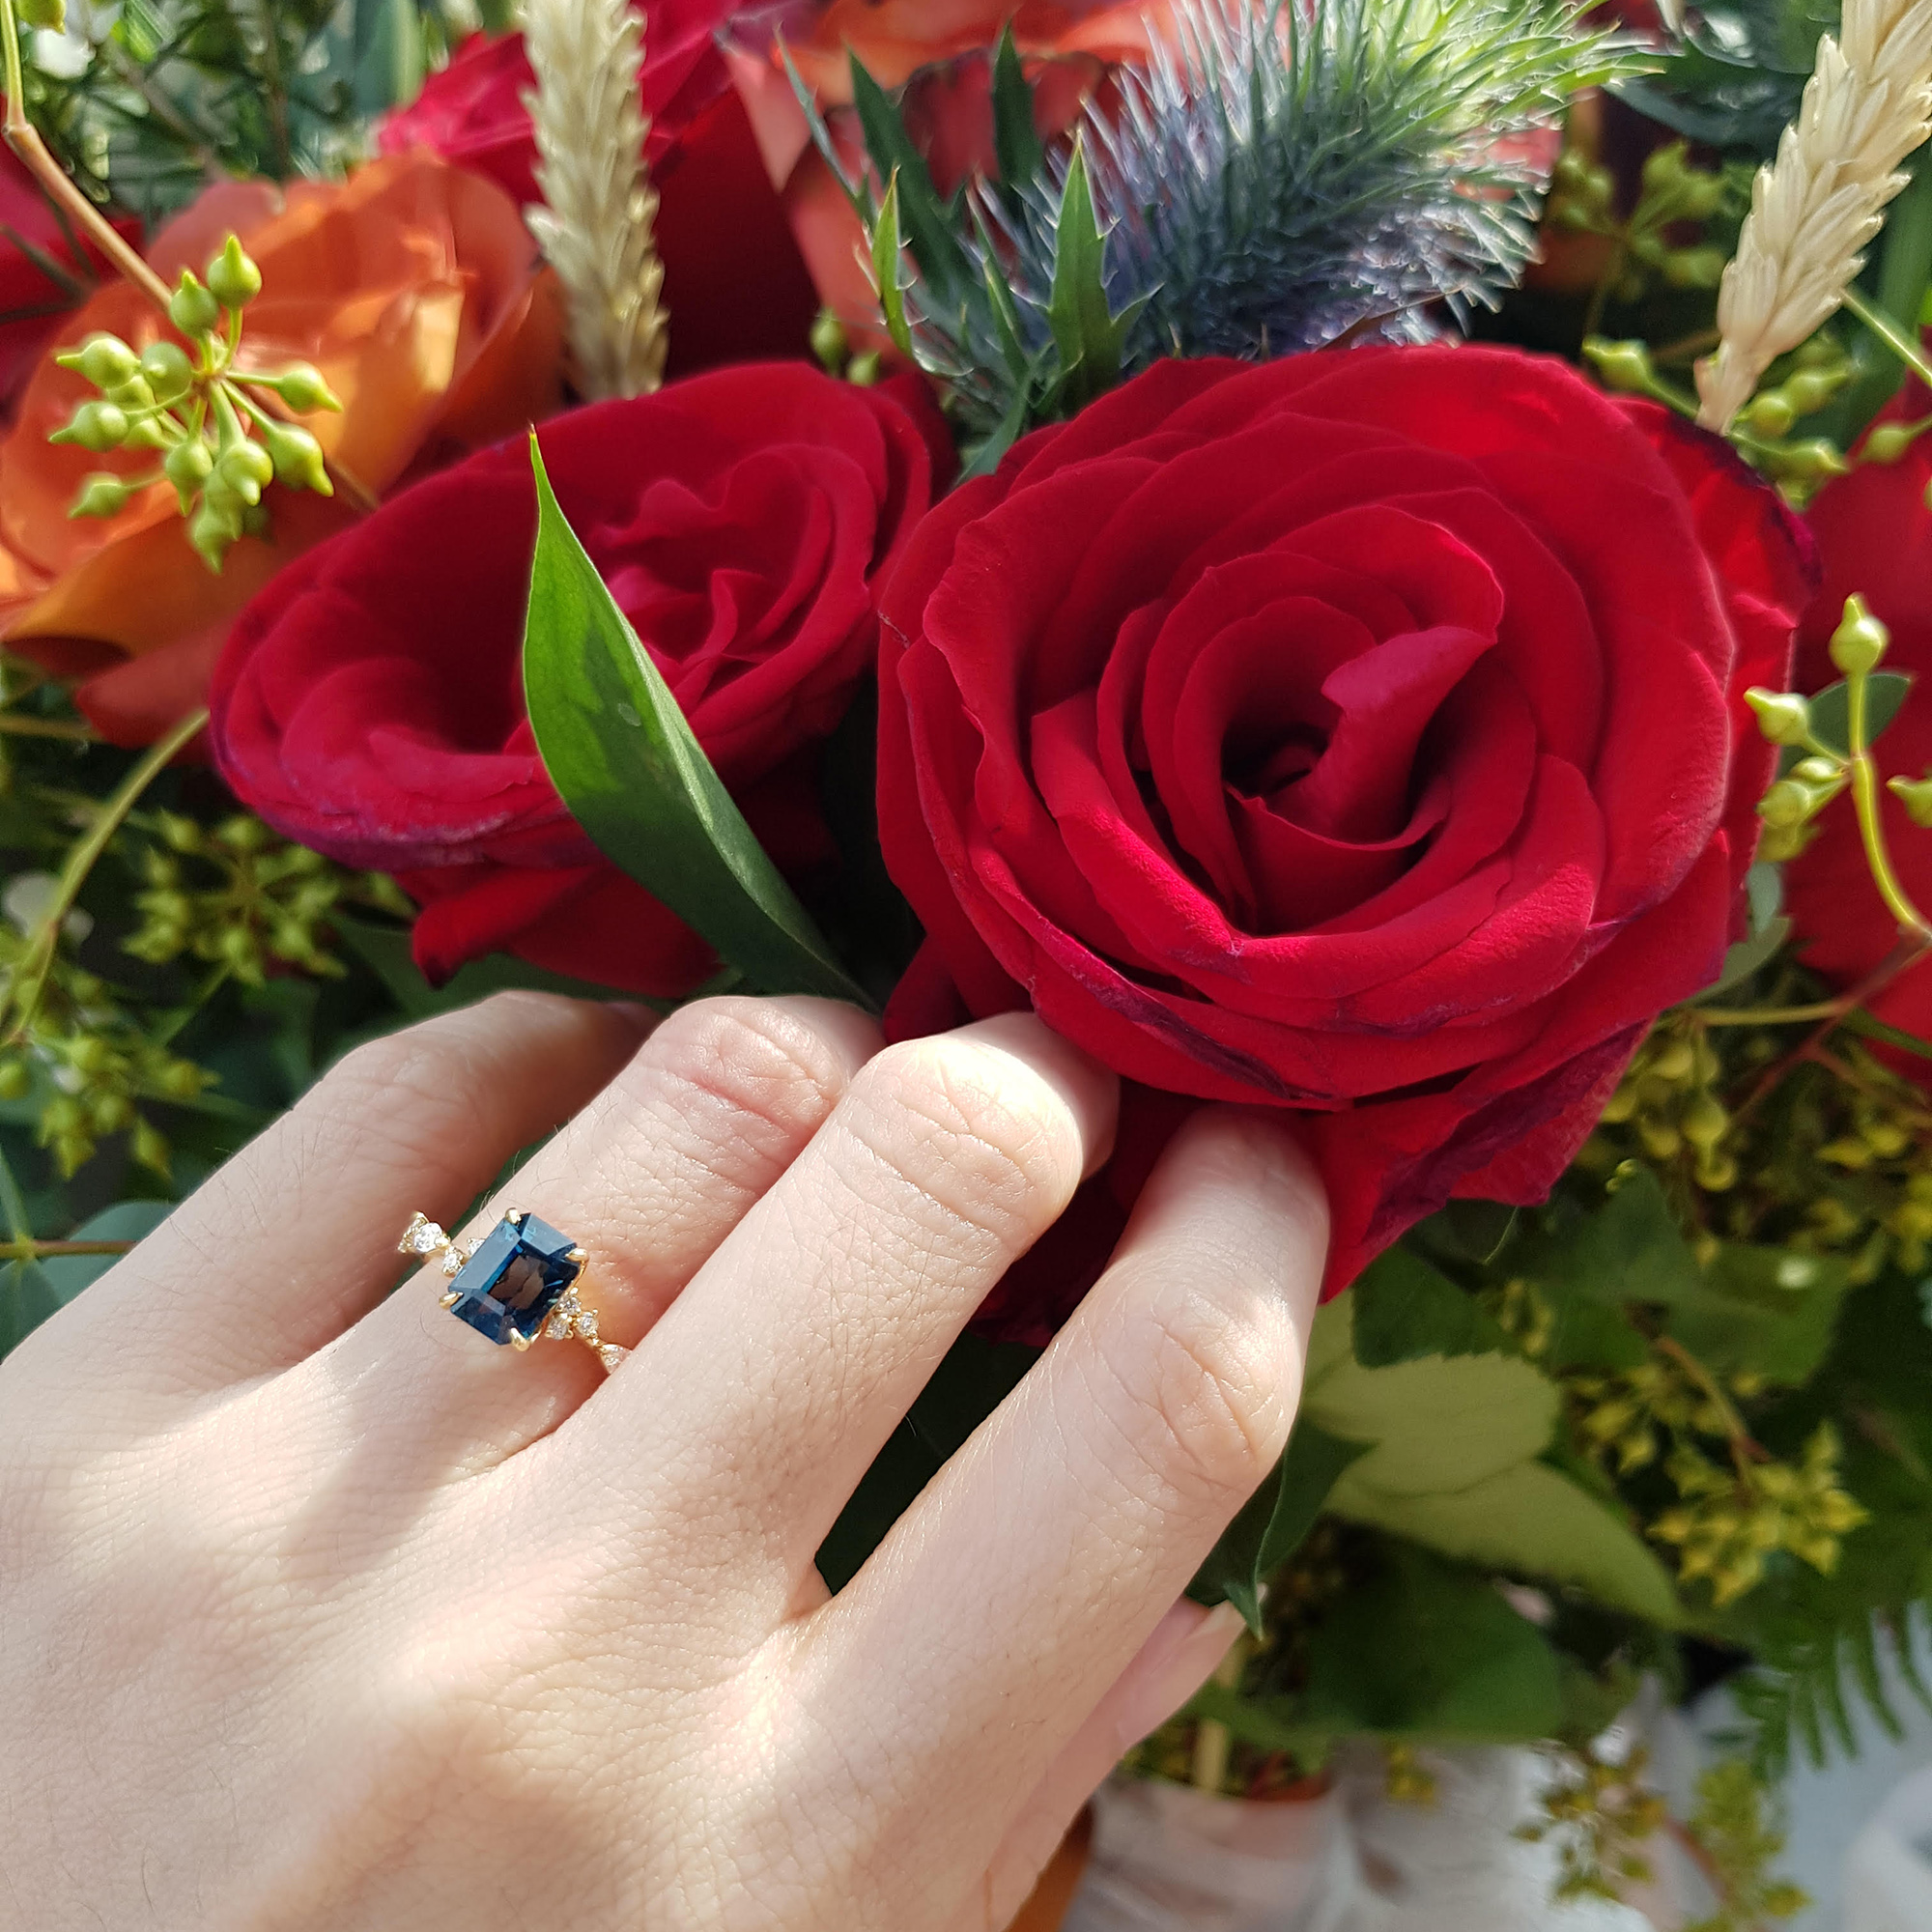 “When two become one” – Custom Made Wedding and Engagement Rings in Singapore with Calla Lily